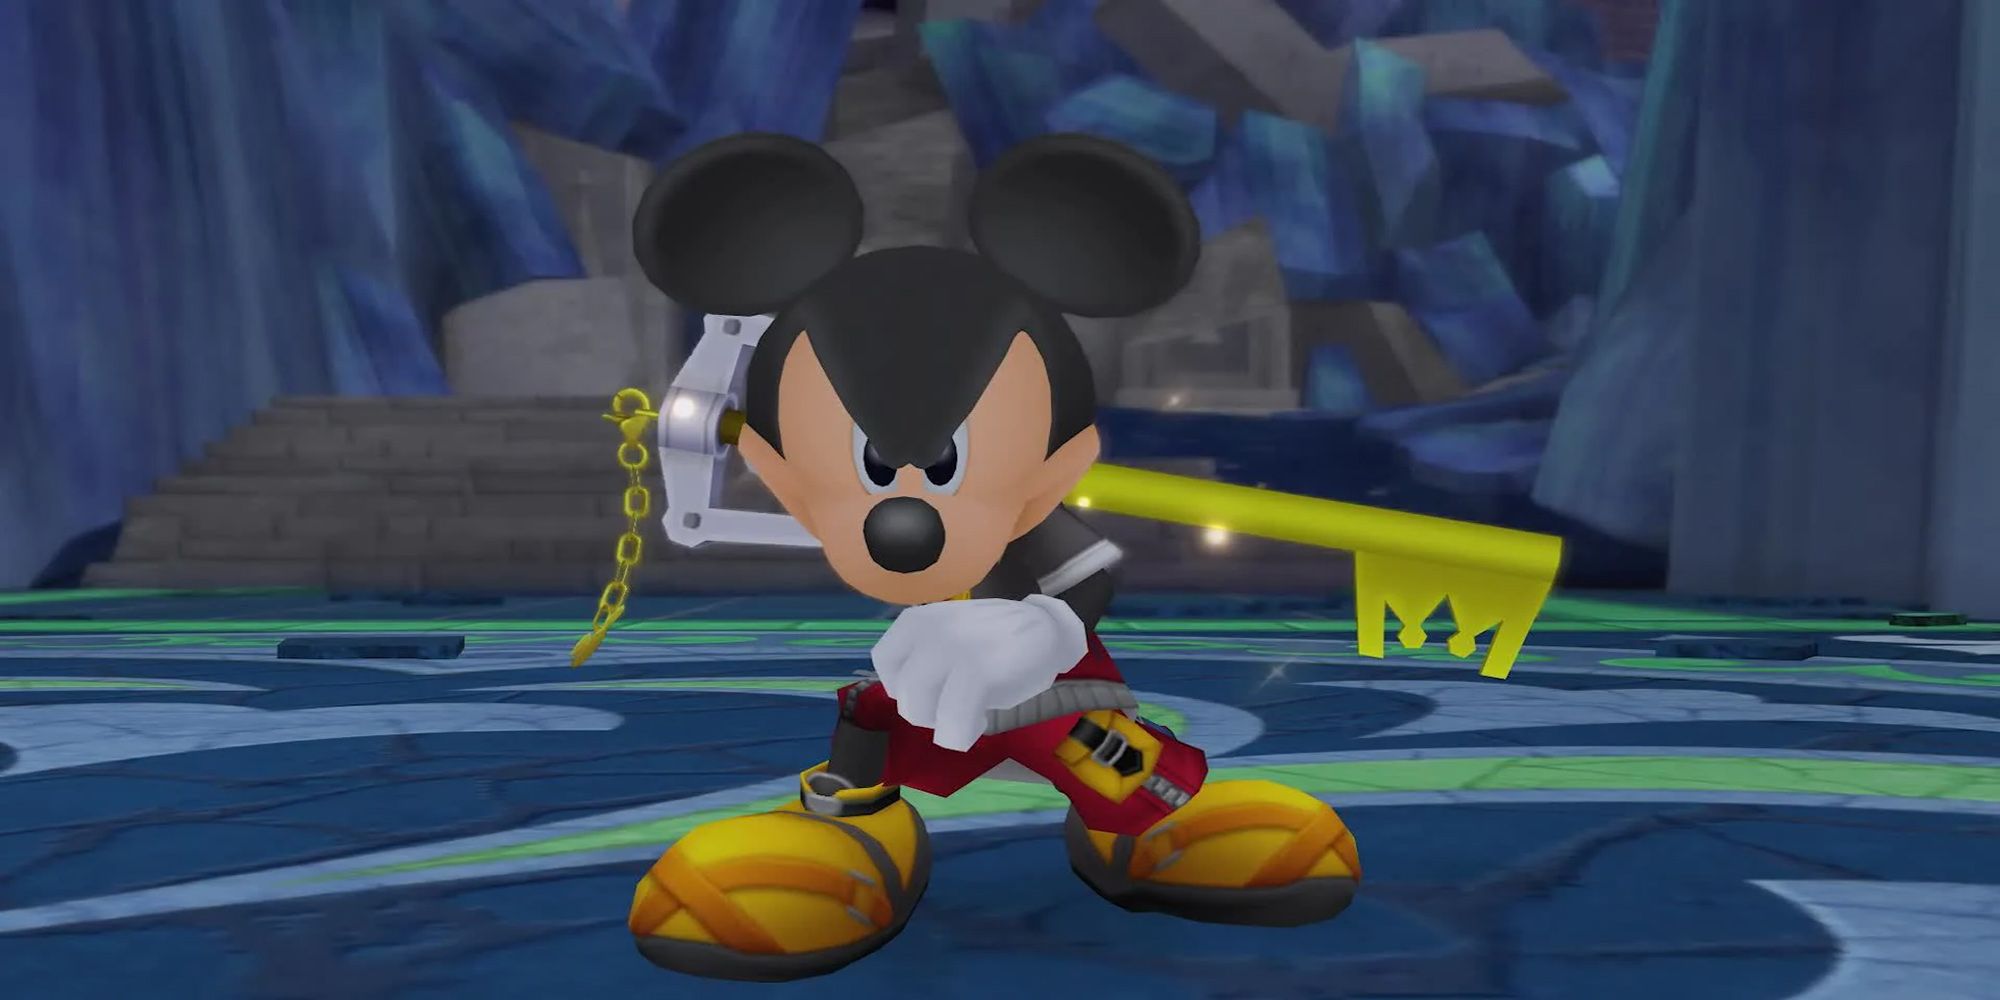 King Mickey appears with his keyblade in Kingdom Hearts.